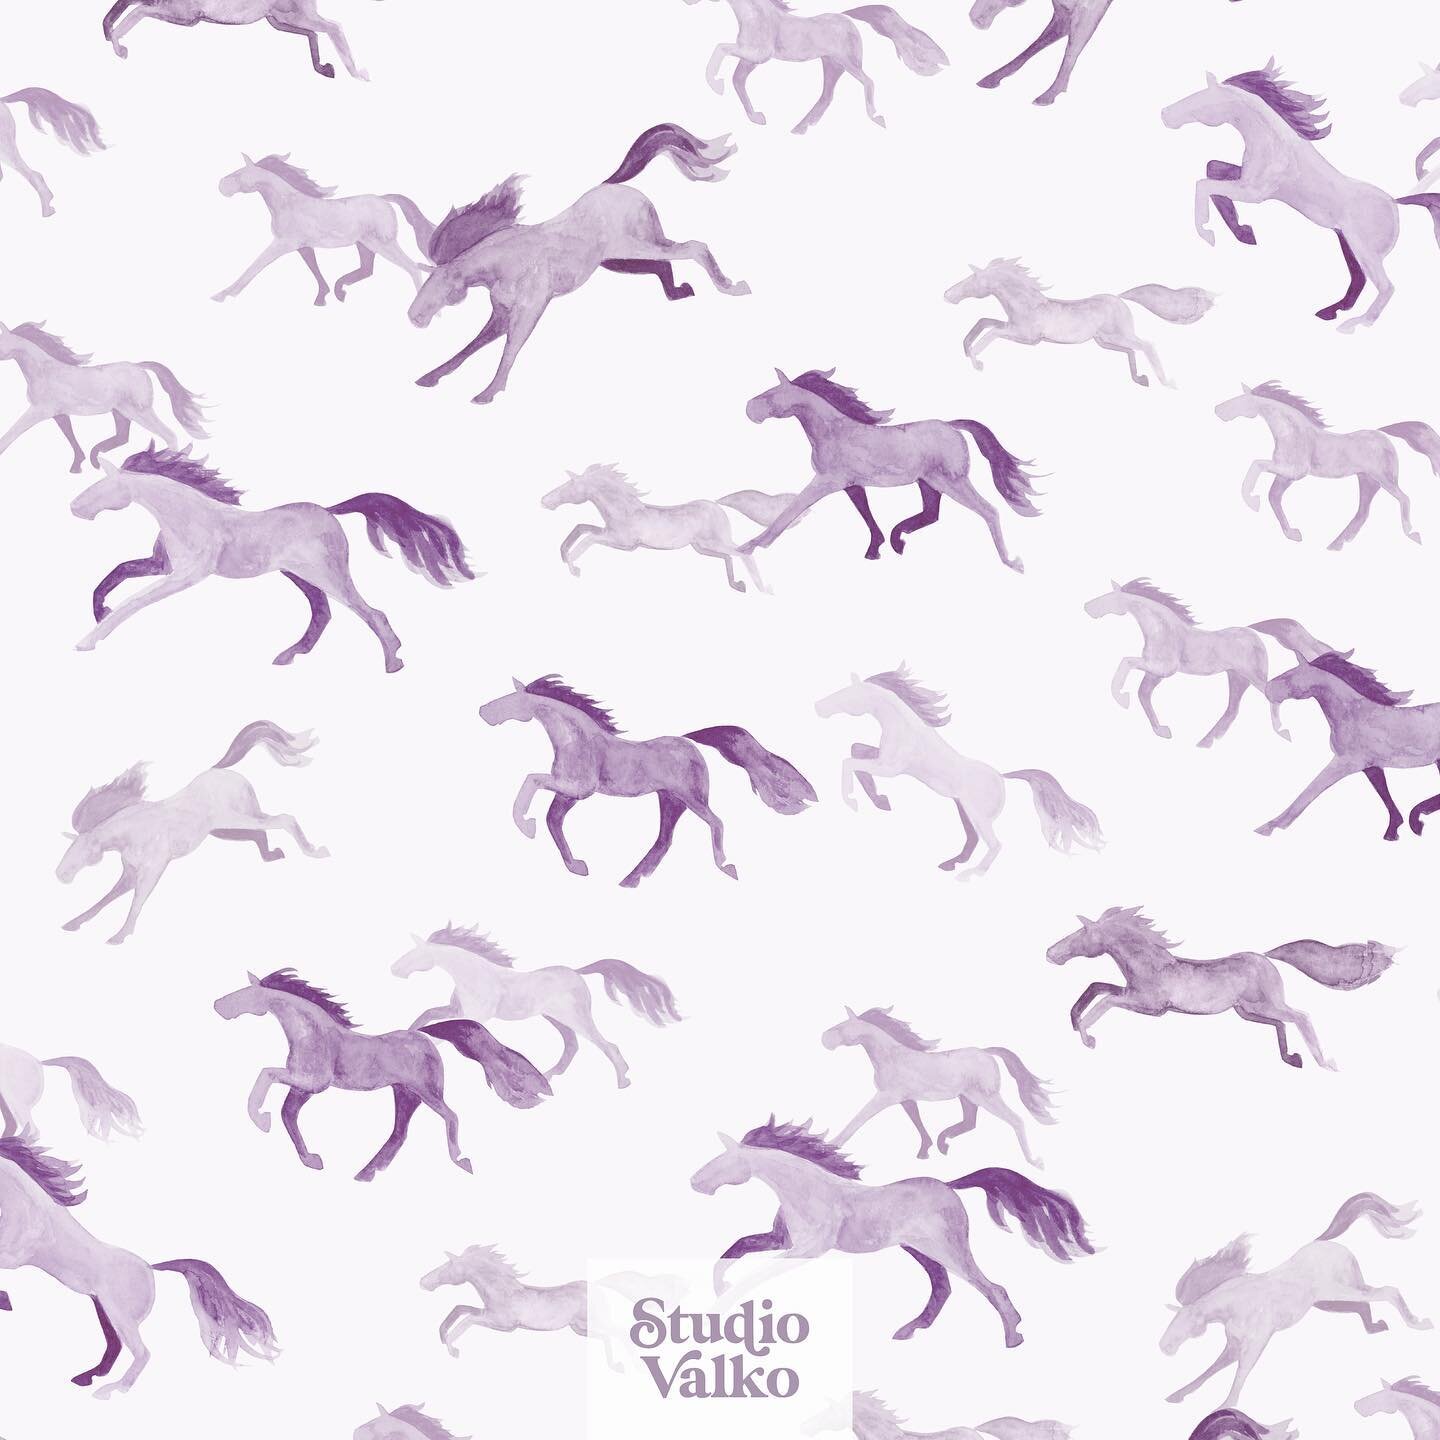 You may have recognized the watercolor horses from one of my stories last week. I&rsquo;m happy to announce that it has been selected to be showcased on @naturalrootsfabric website as part of their watercolor spring art call. 

I&rsquo;m imagining th